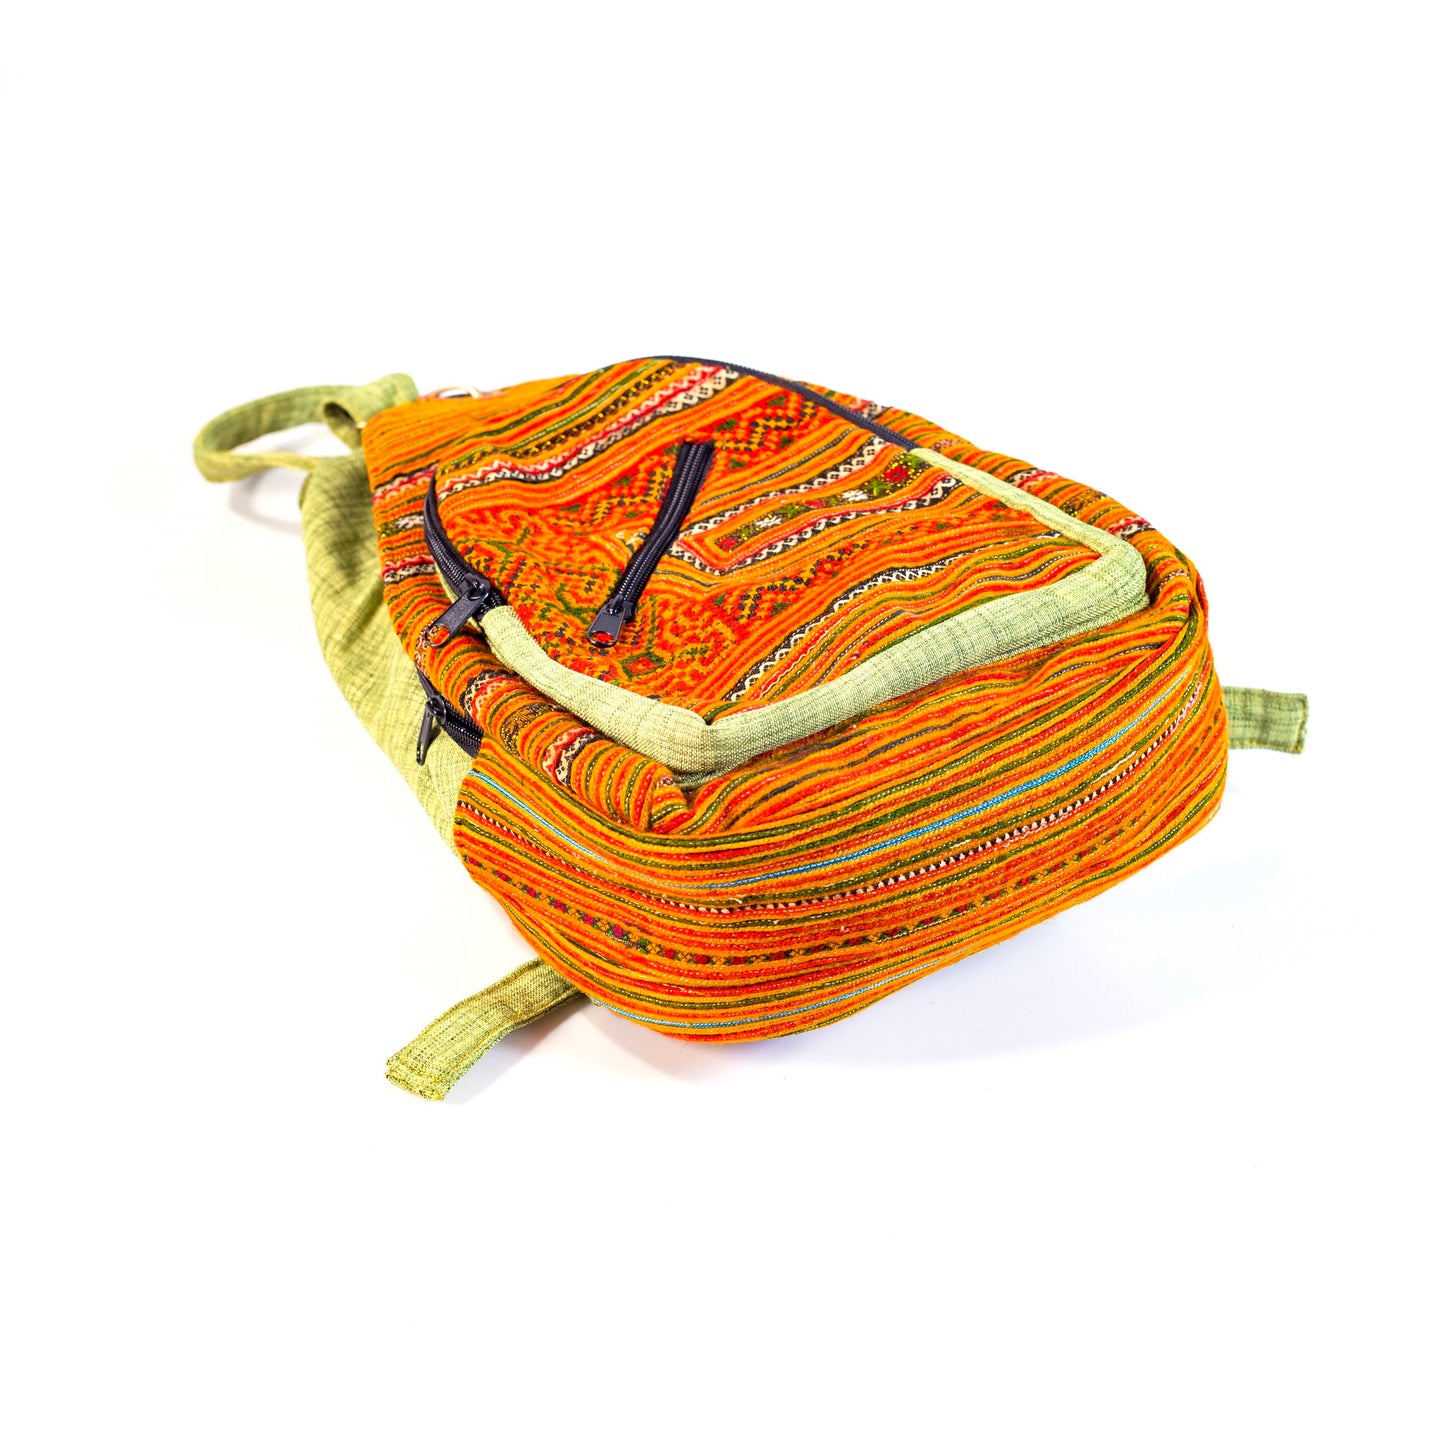 Multi-purpose backpack and sling, orange blue hand-embroidery fabric, bright green trim